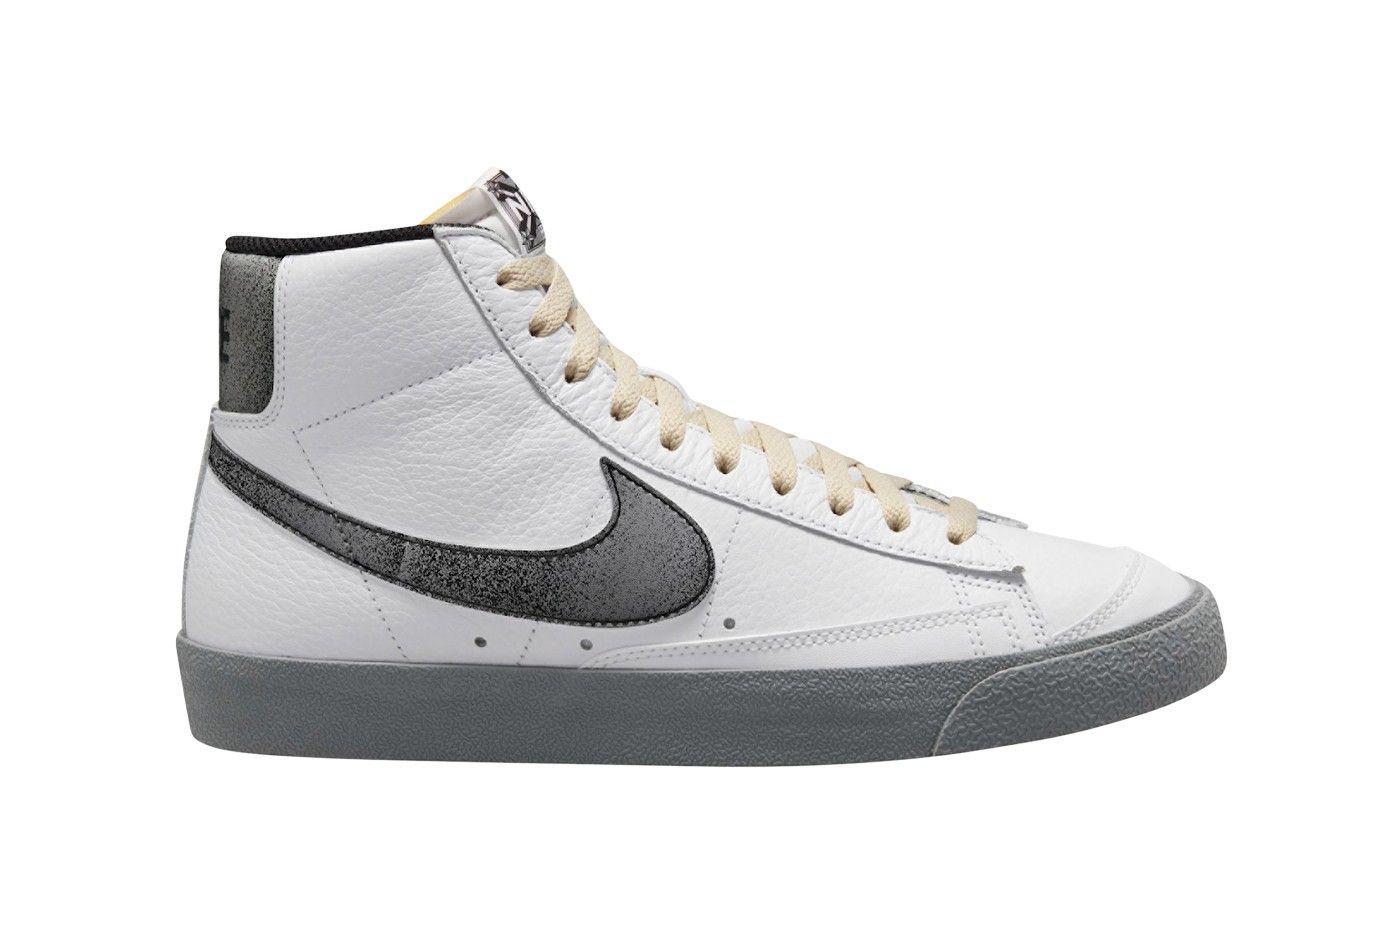 Nike Adds AF1 Series & Mid Blazer to 'Classics' Pack